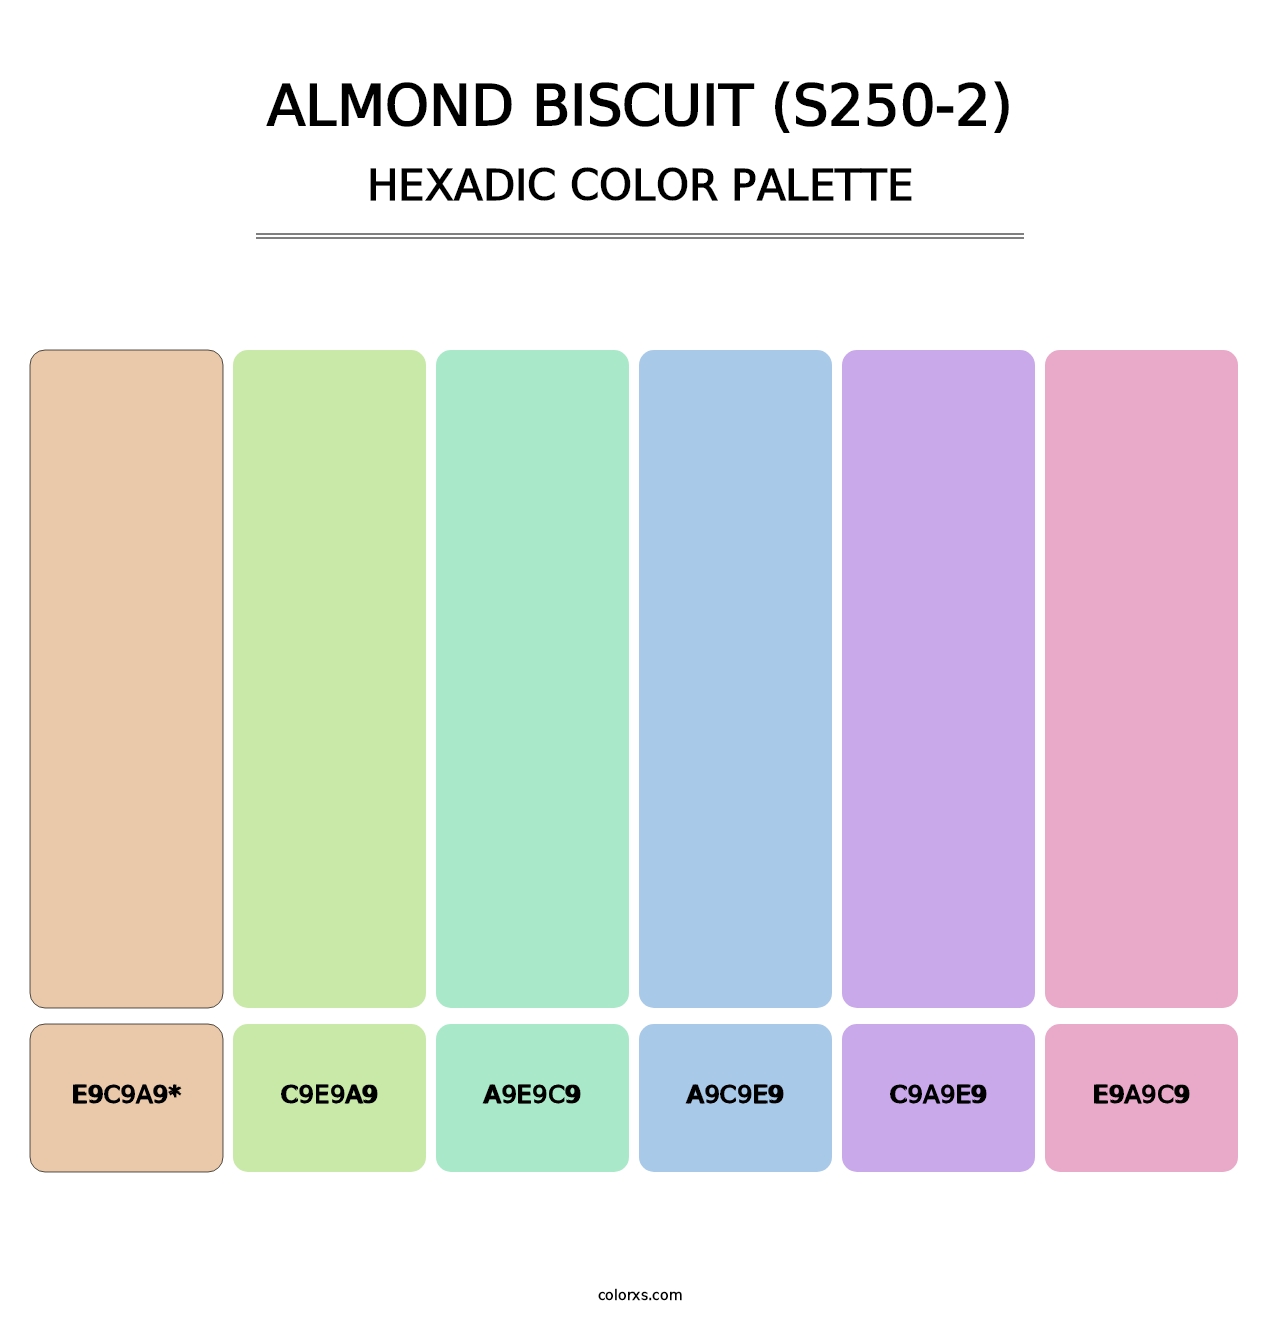 Almond Biscuit (S250-2) - Hexadic Color Palette